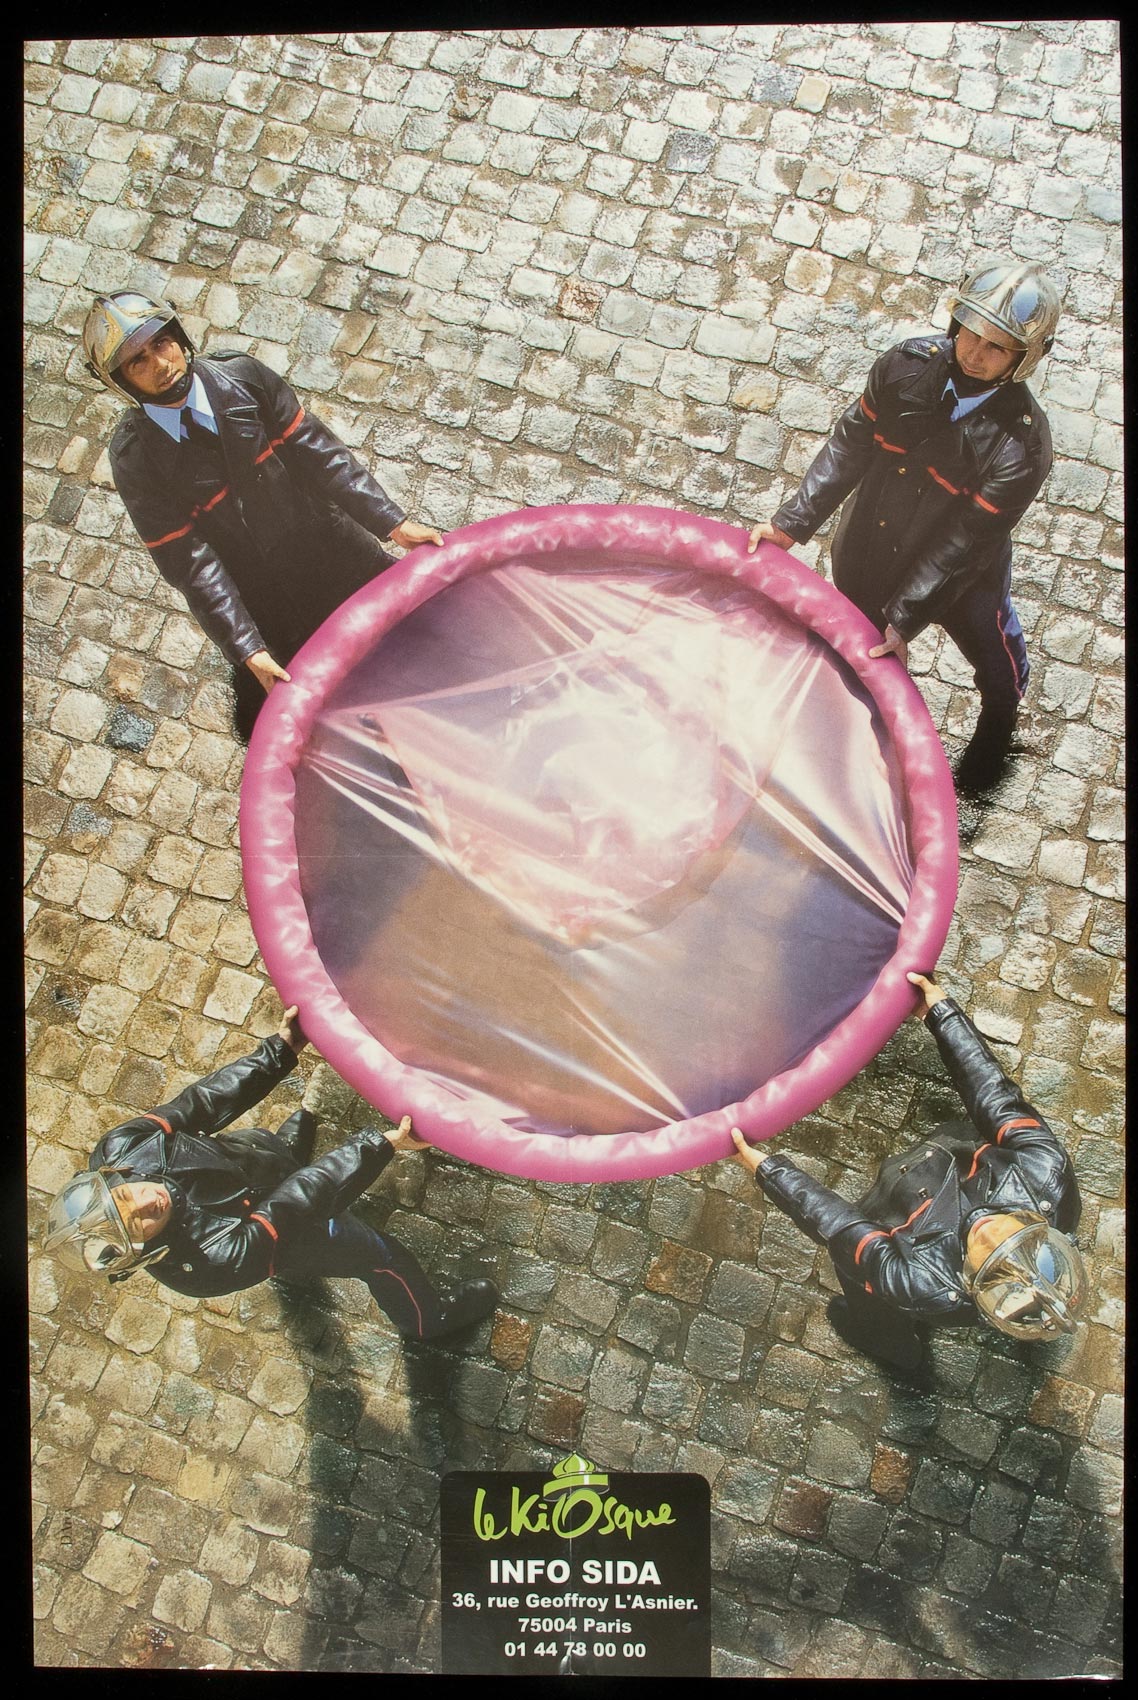 Four fireman seen from above hold an oversized pink condom still rolled up in a circle, as if it's a safety net ready for someone to jump into.